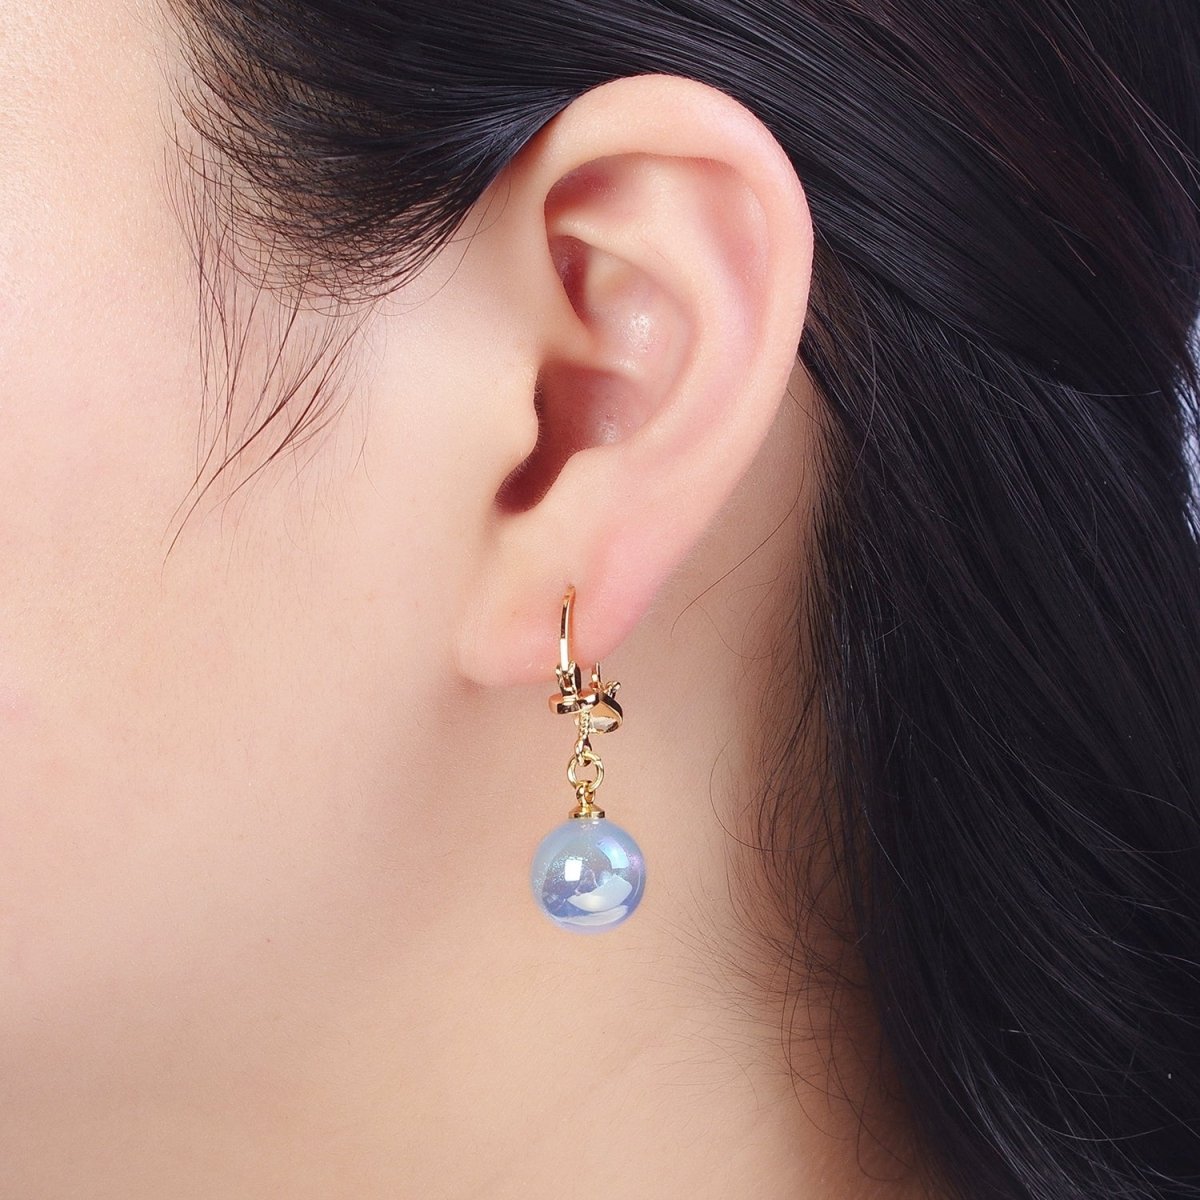 24K Gold Filled Leverback Earrings Small Hoop Earrings with Round Ball Pastel AB Color Drop Q-204 Q-216 Q-272 Q-277 Q-318 - DLUXCA